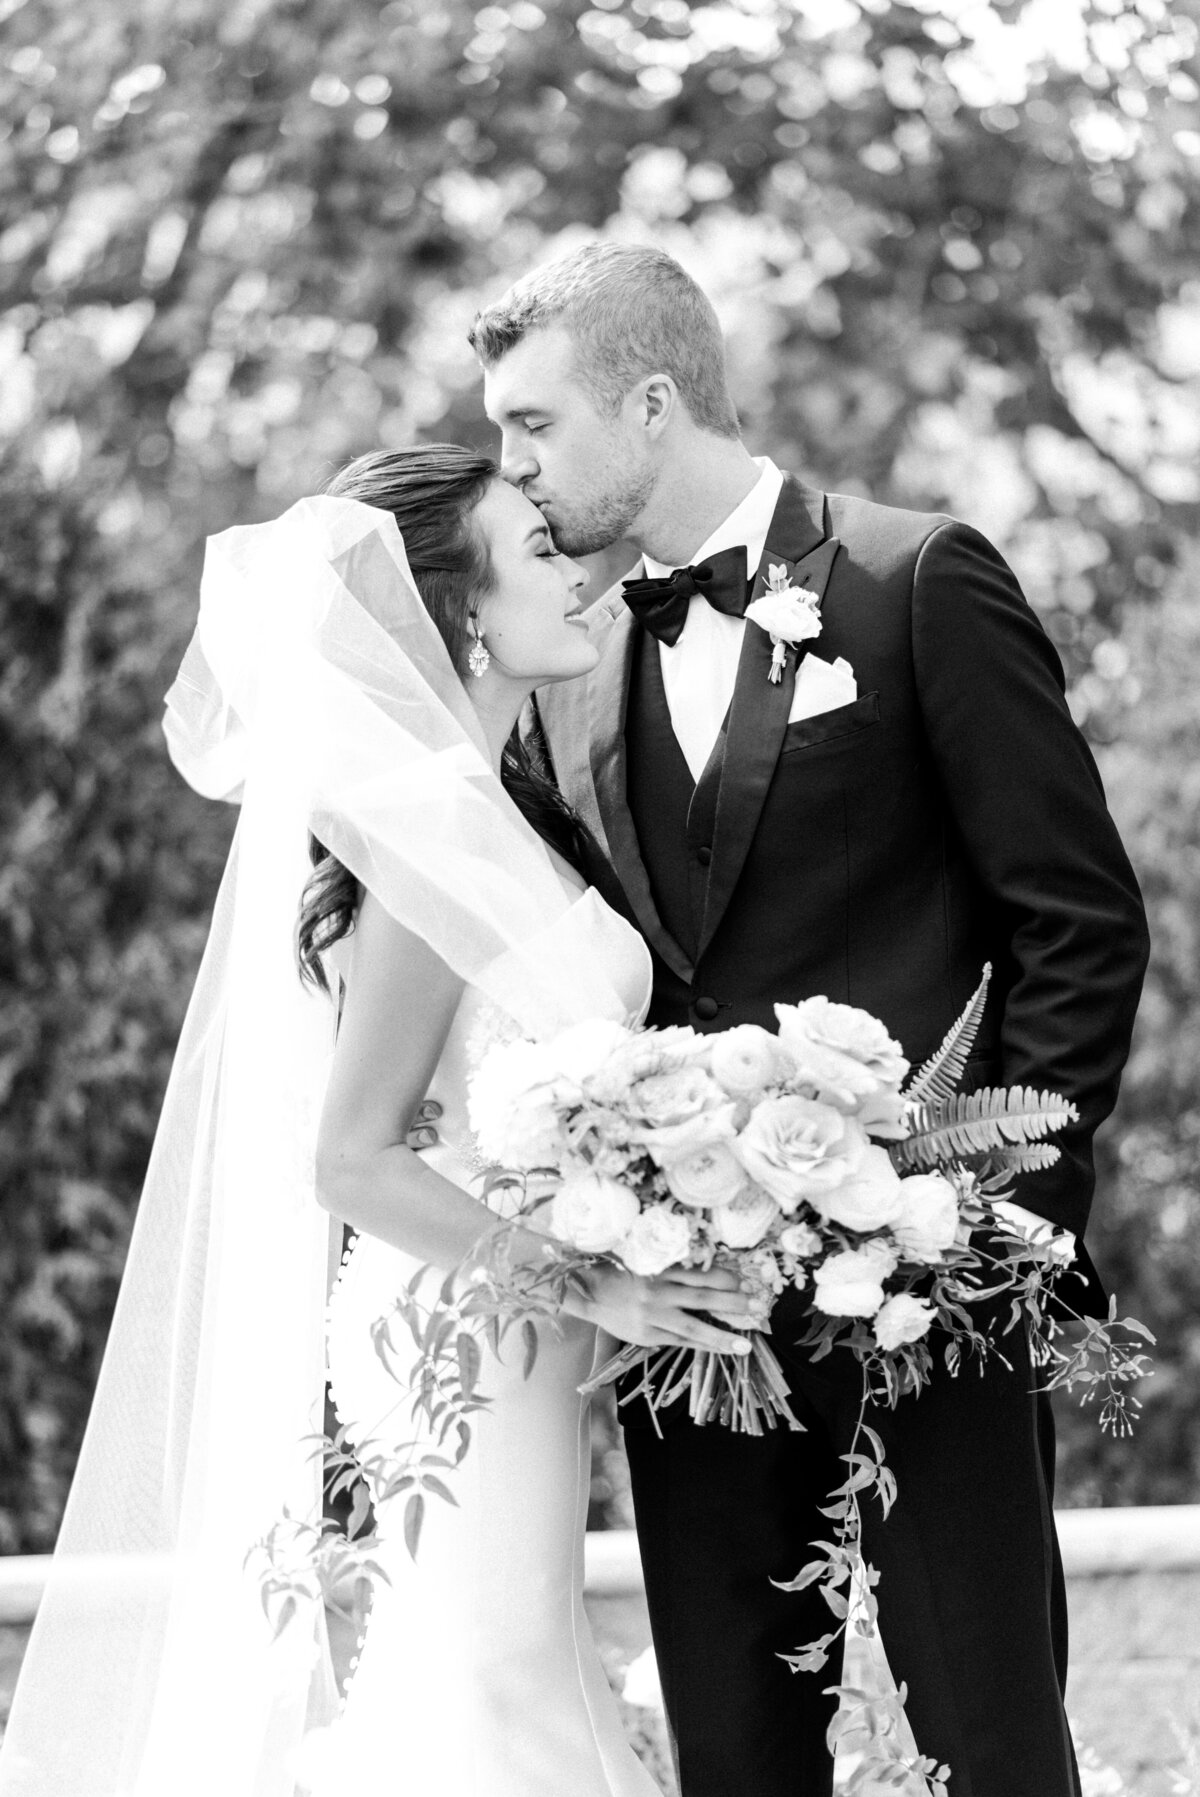 Mattea Rose Photography is a Minneapolis and Phoenix based wedding photographer. Mattea Rose Photography is a luxury Minnesota and Arizona wedding photographer.